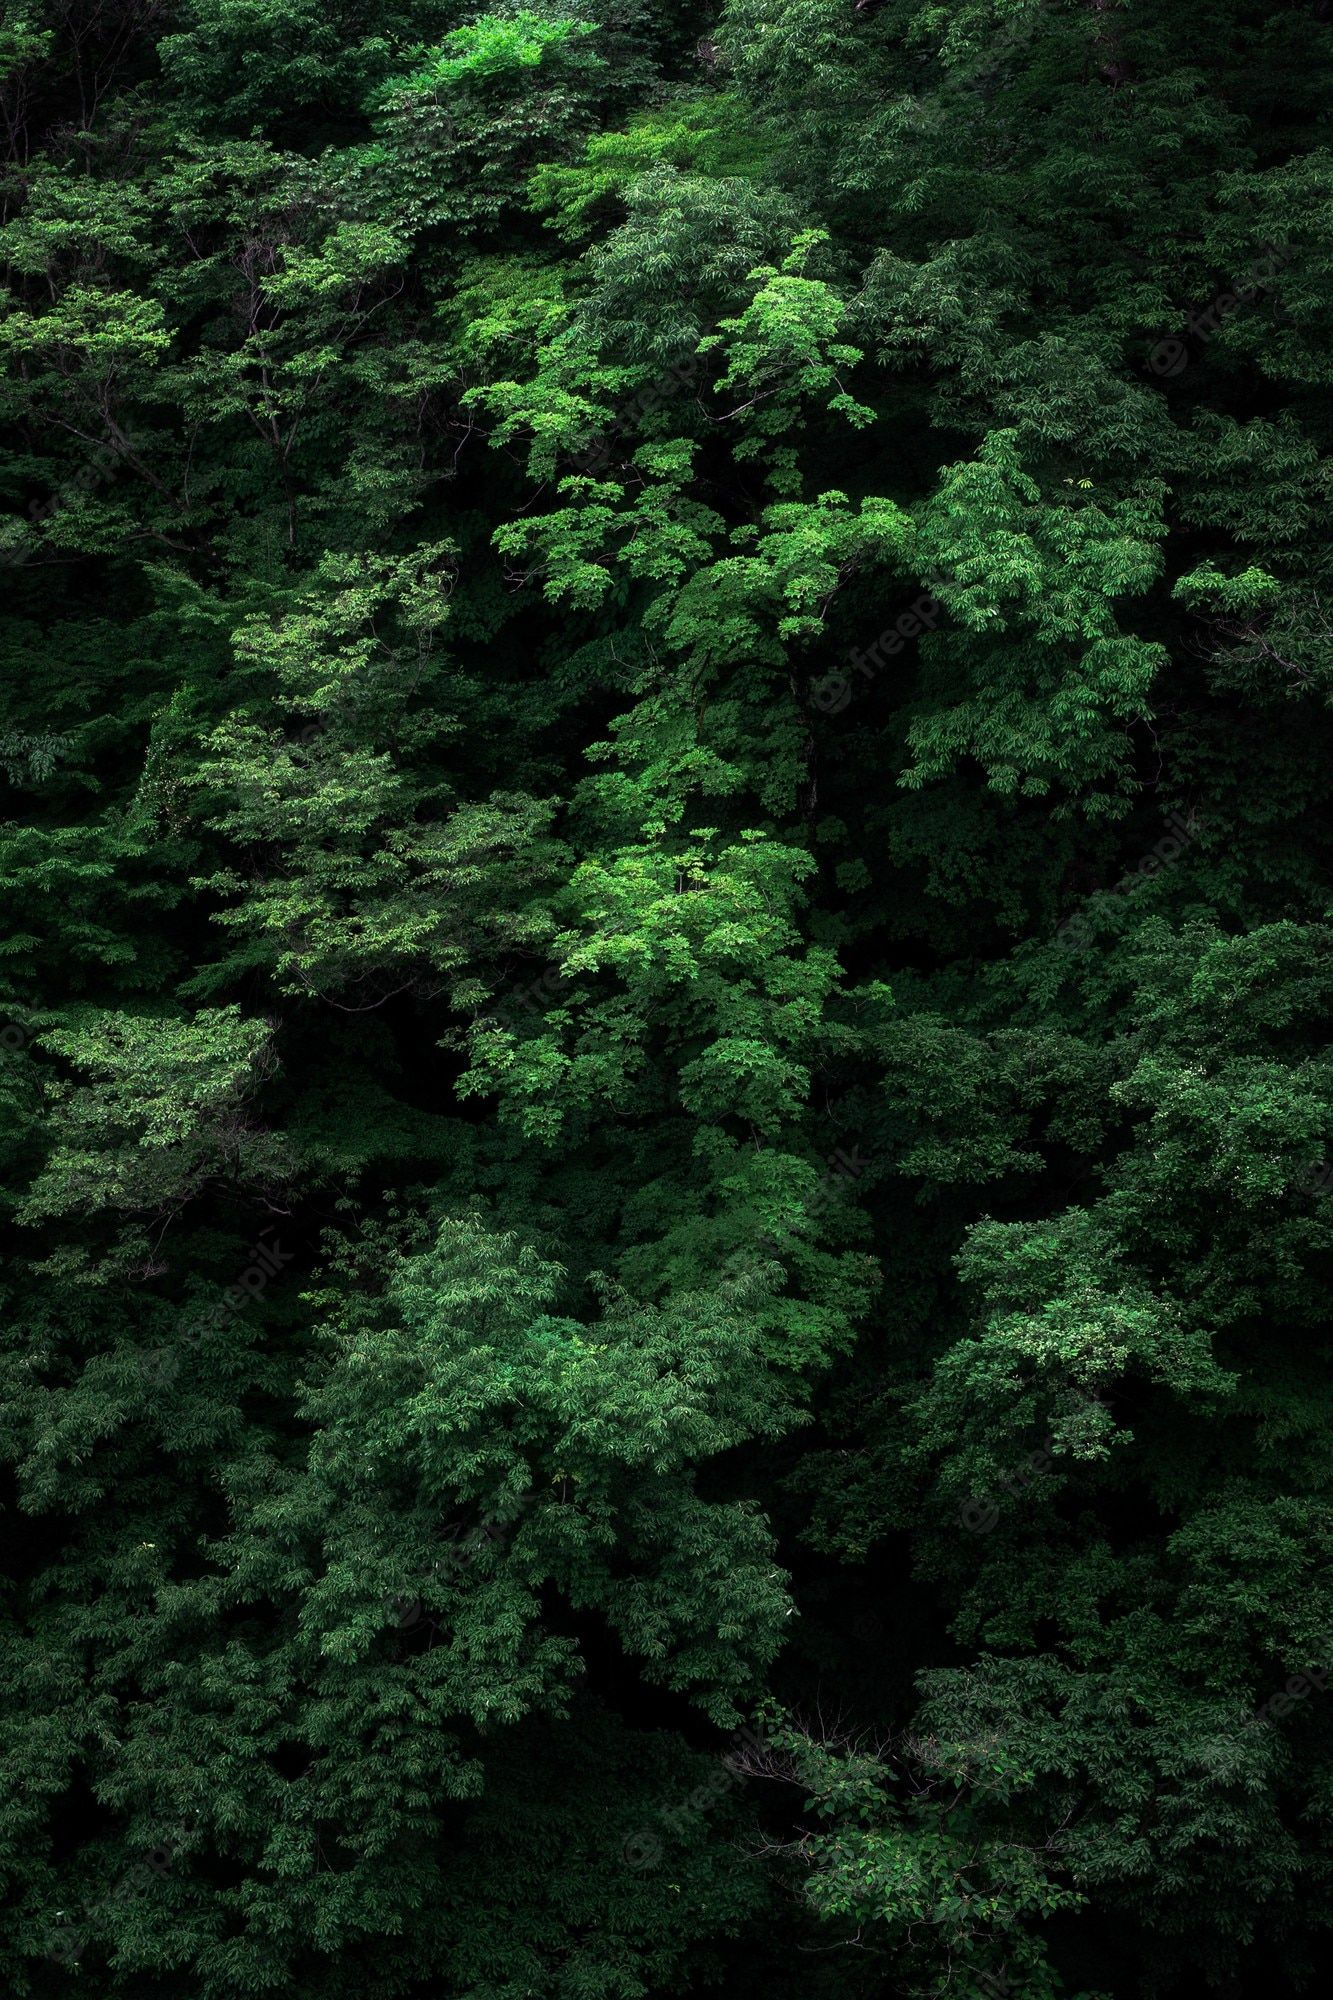 A forest of green trees - Jungle